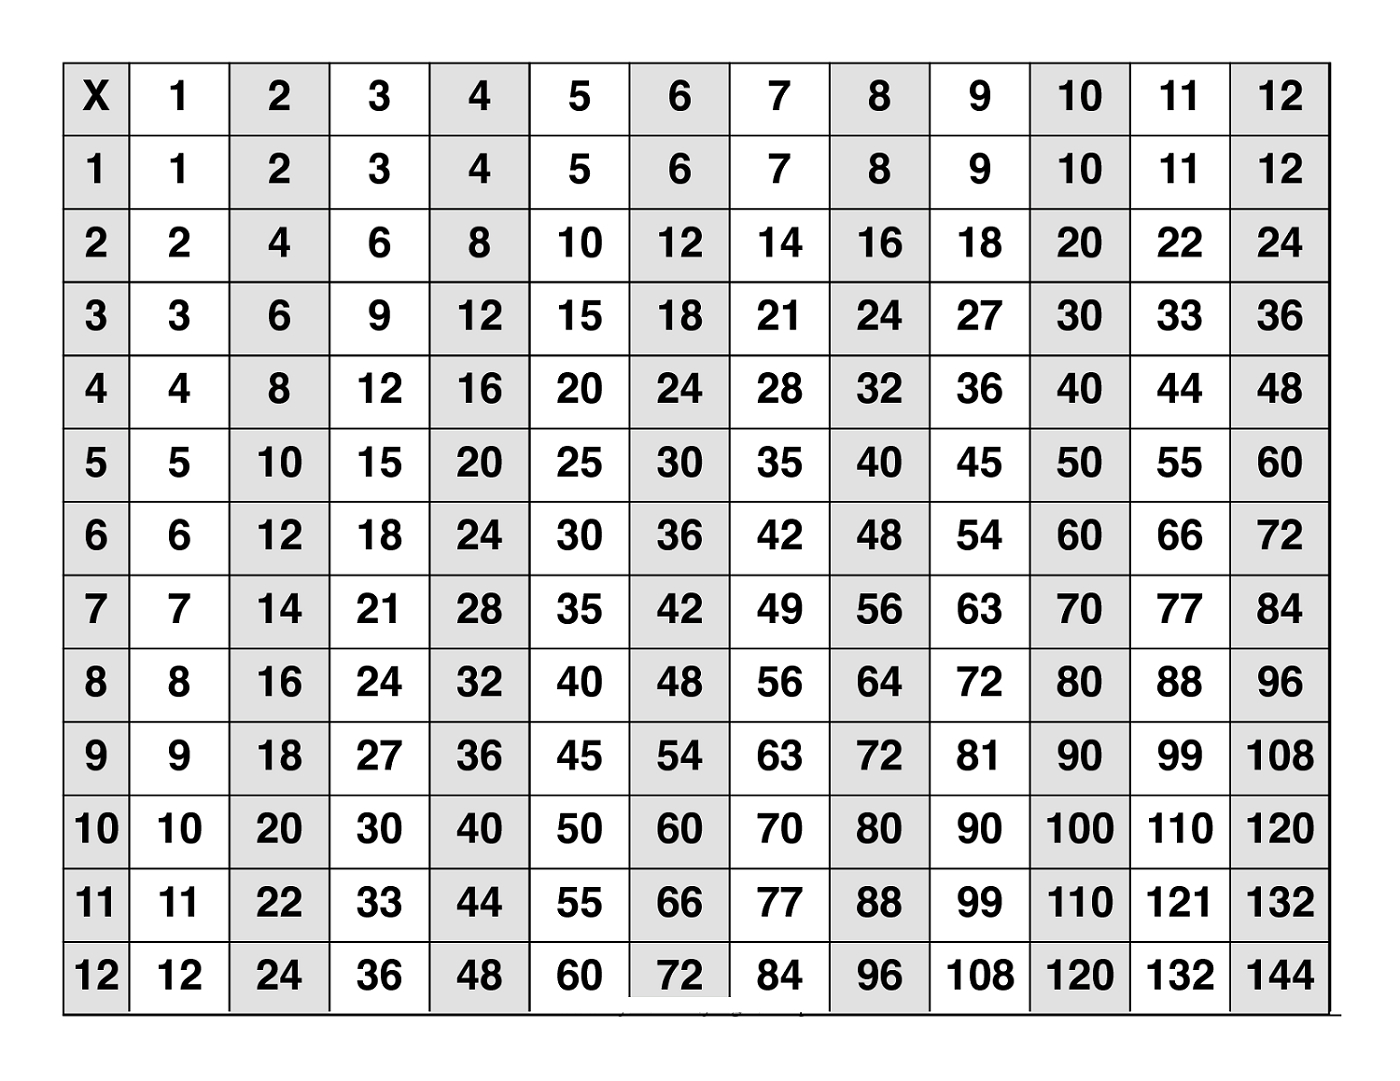 Large Multiplication Table For Students | Loving Printable pertaining to Printable Multiplication Chart 25X25